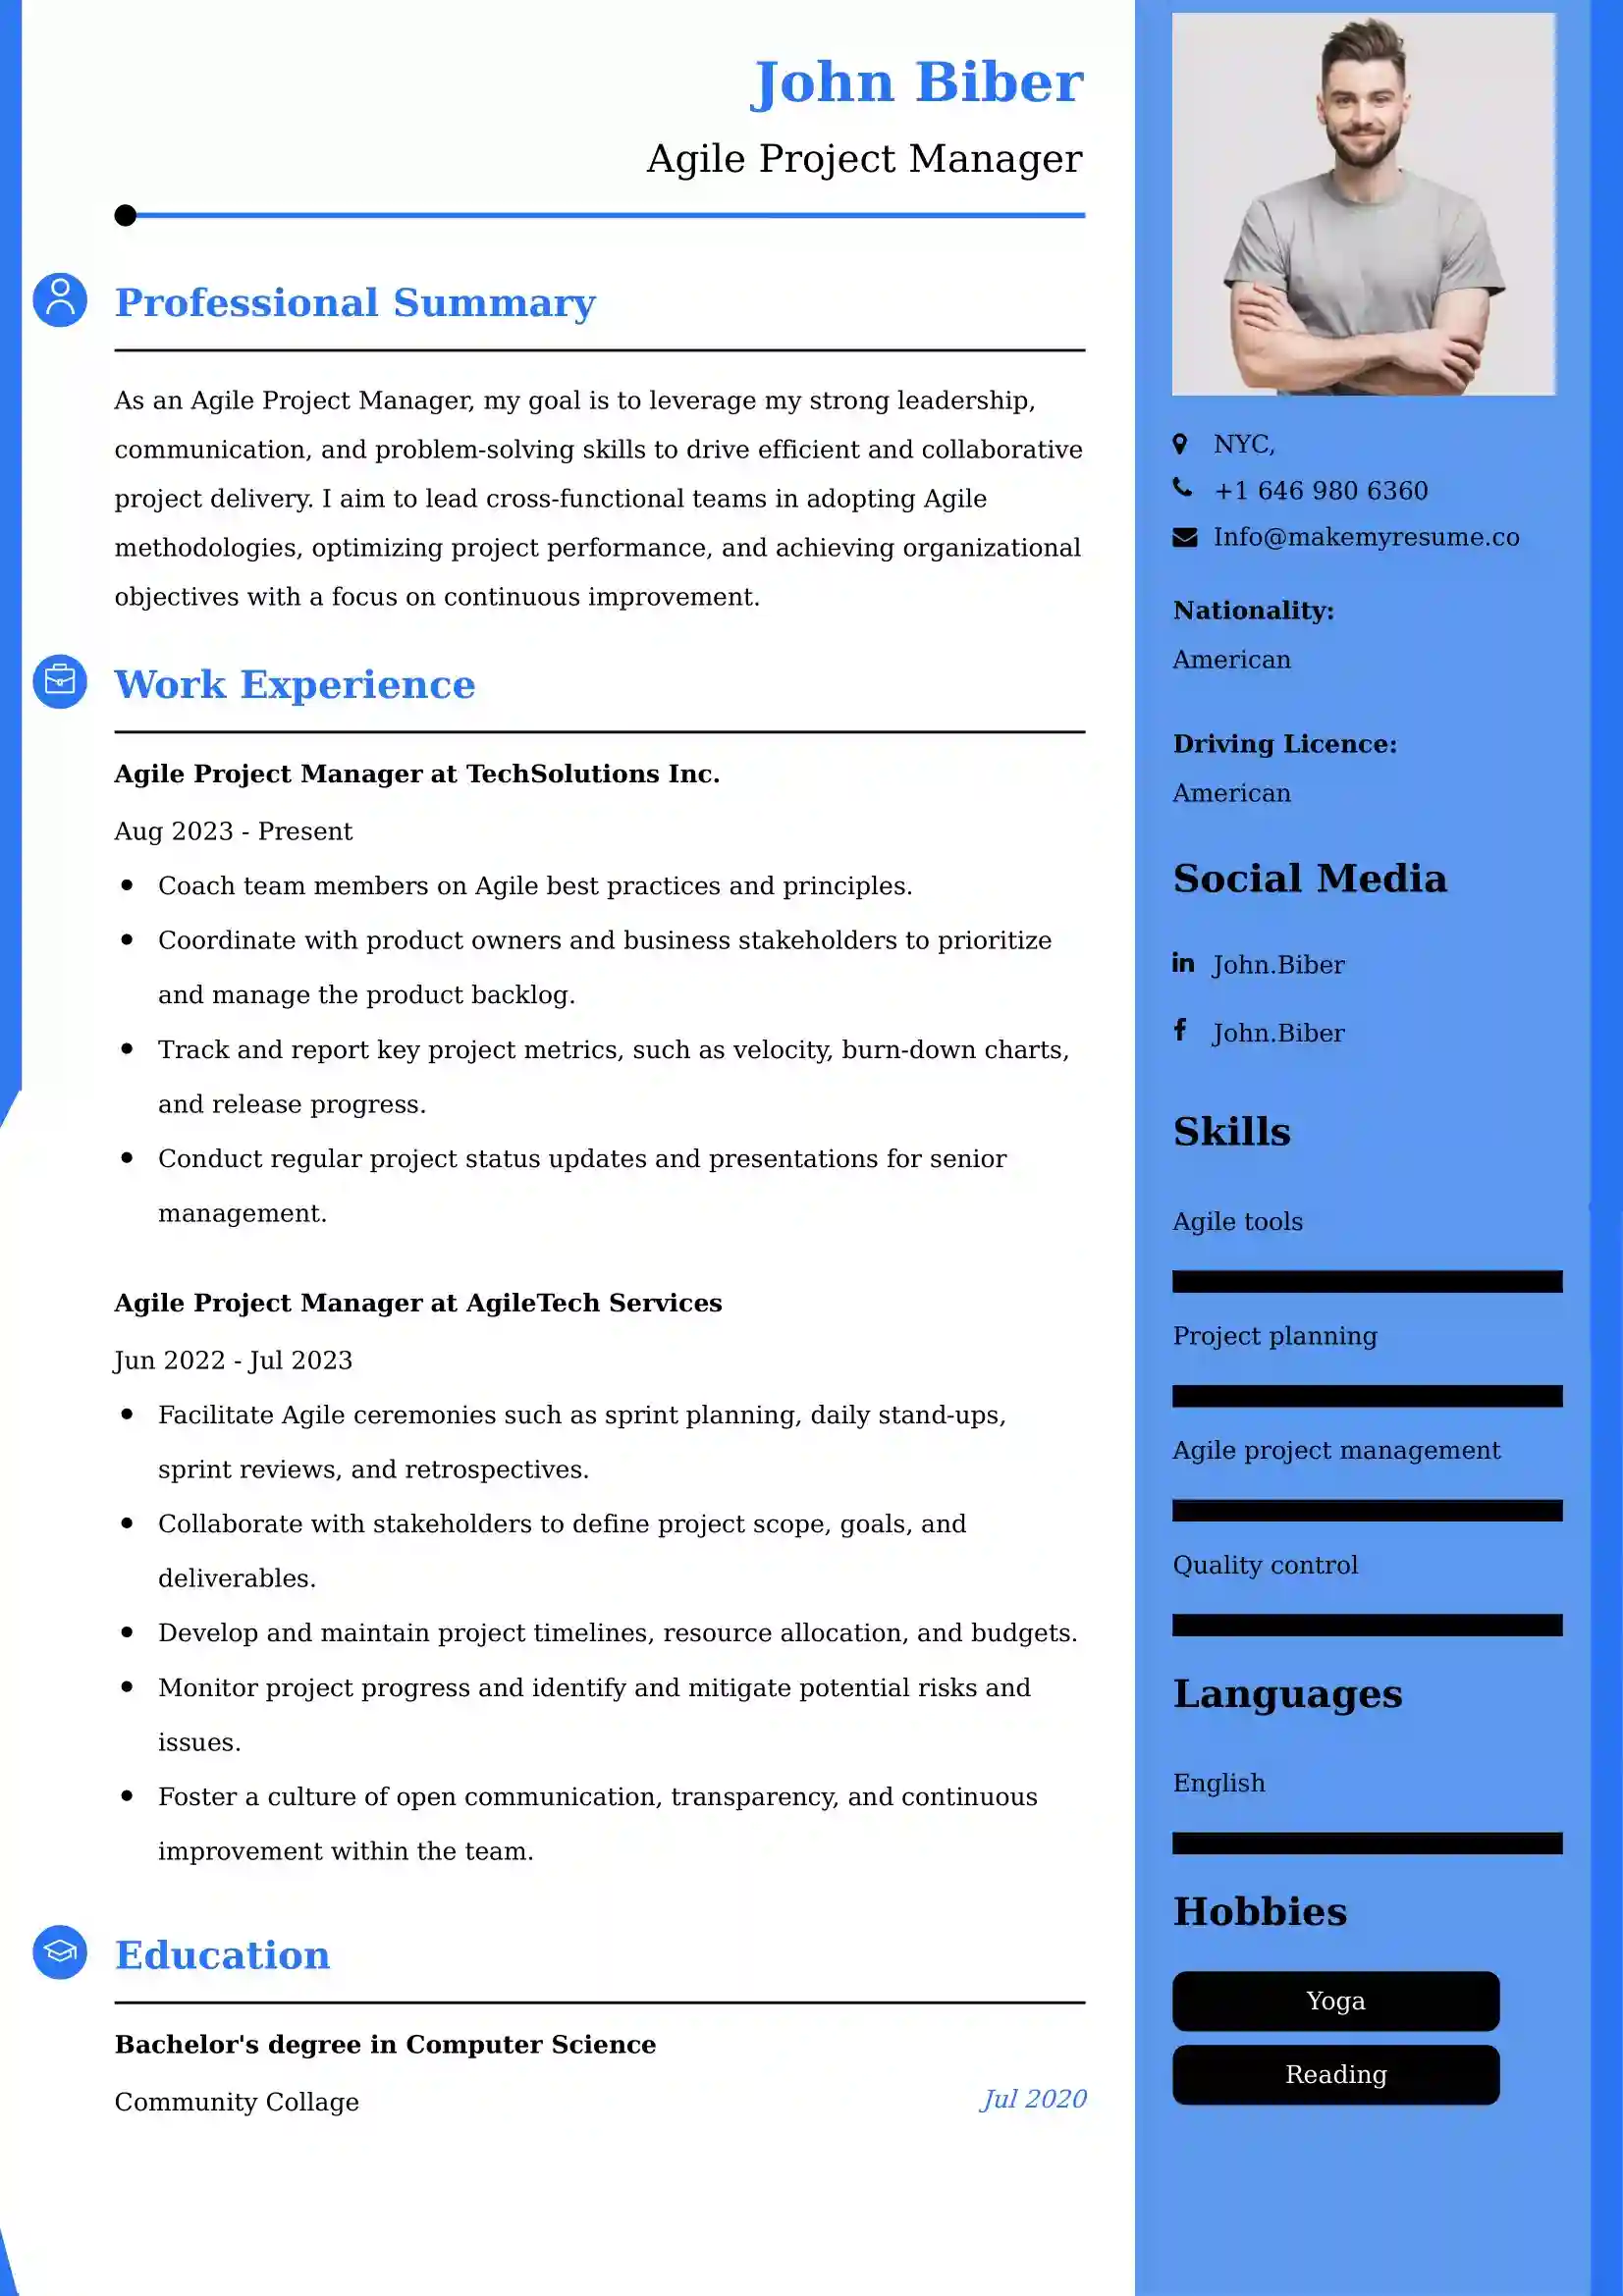 Agile Project Manager Resume Examples - Australian Format and Tips